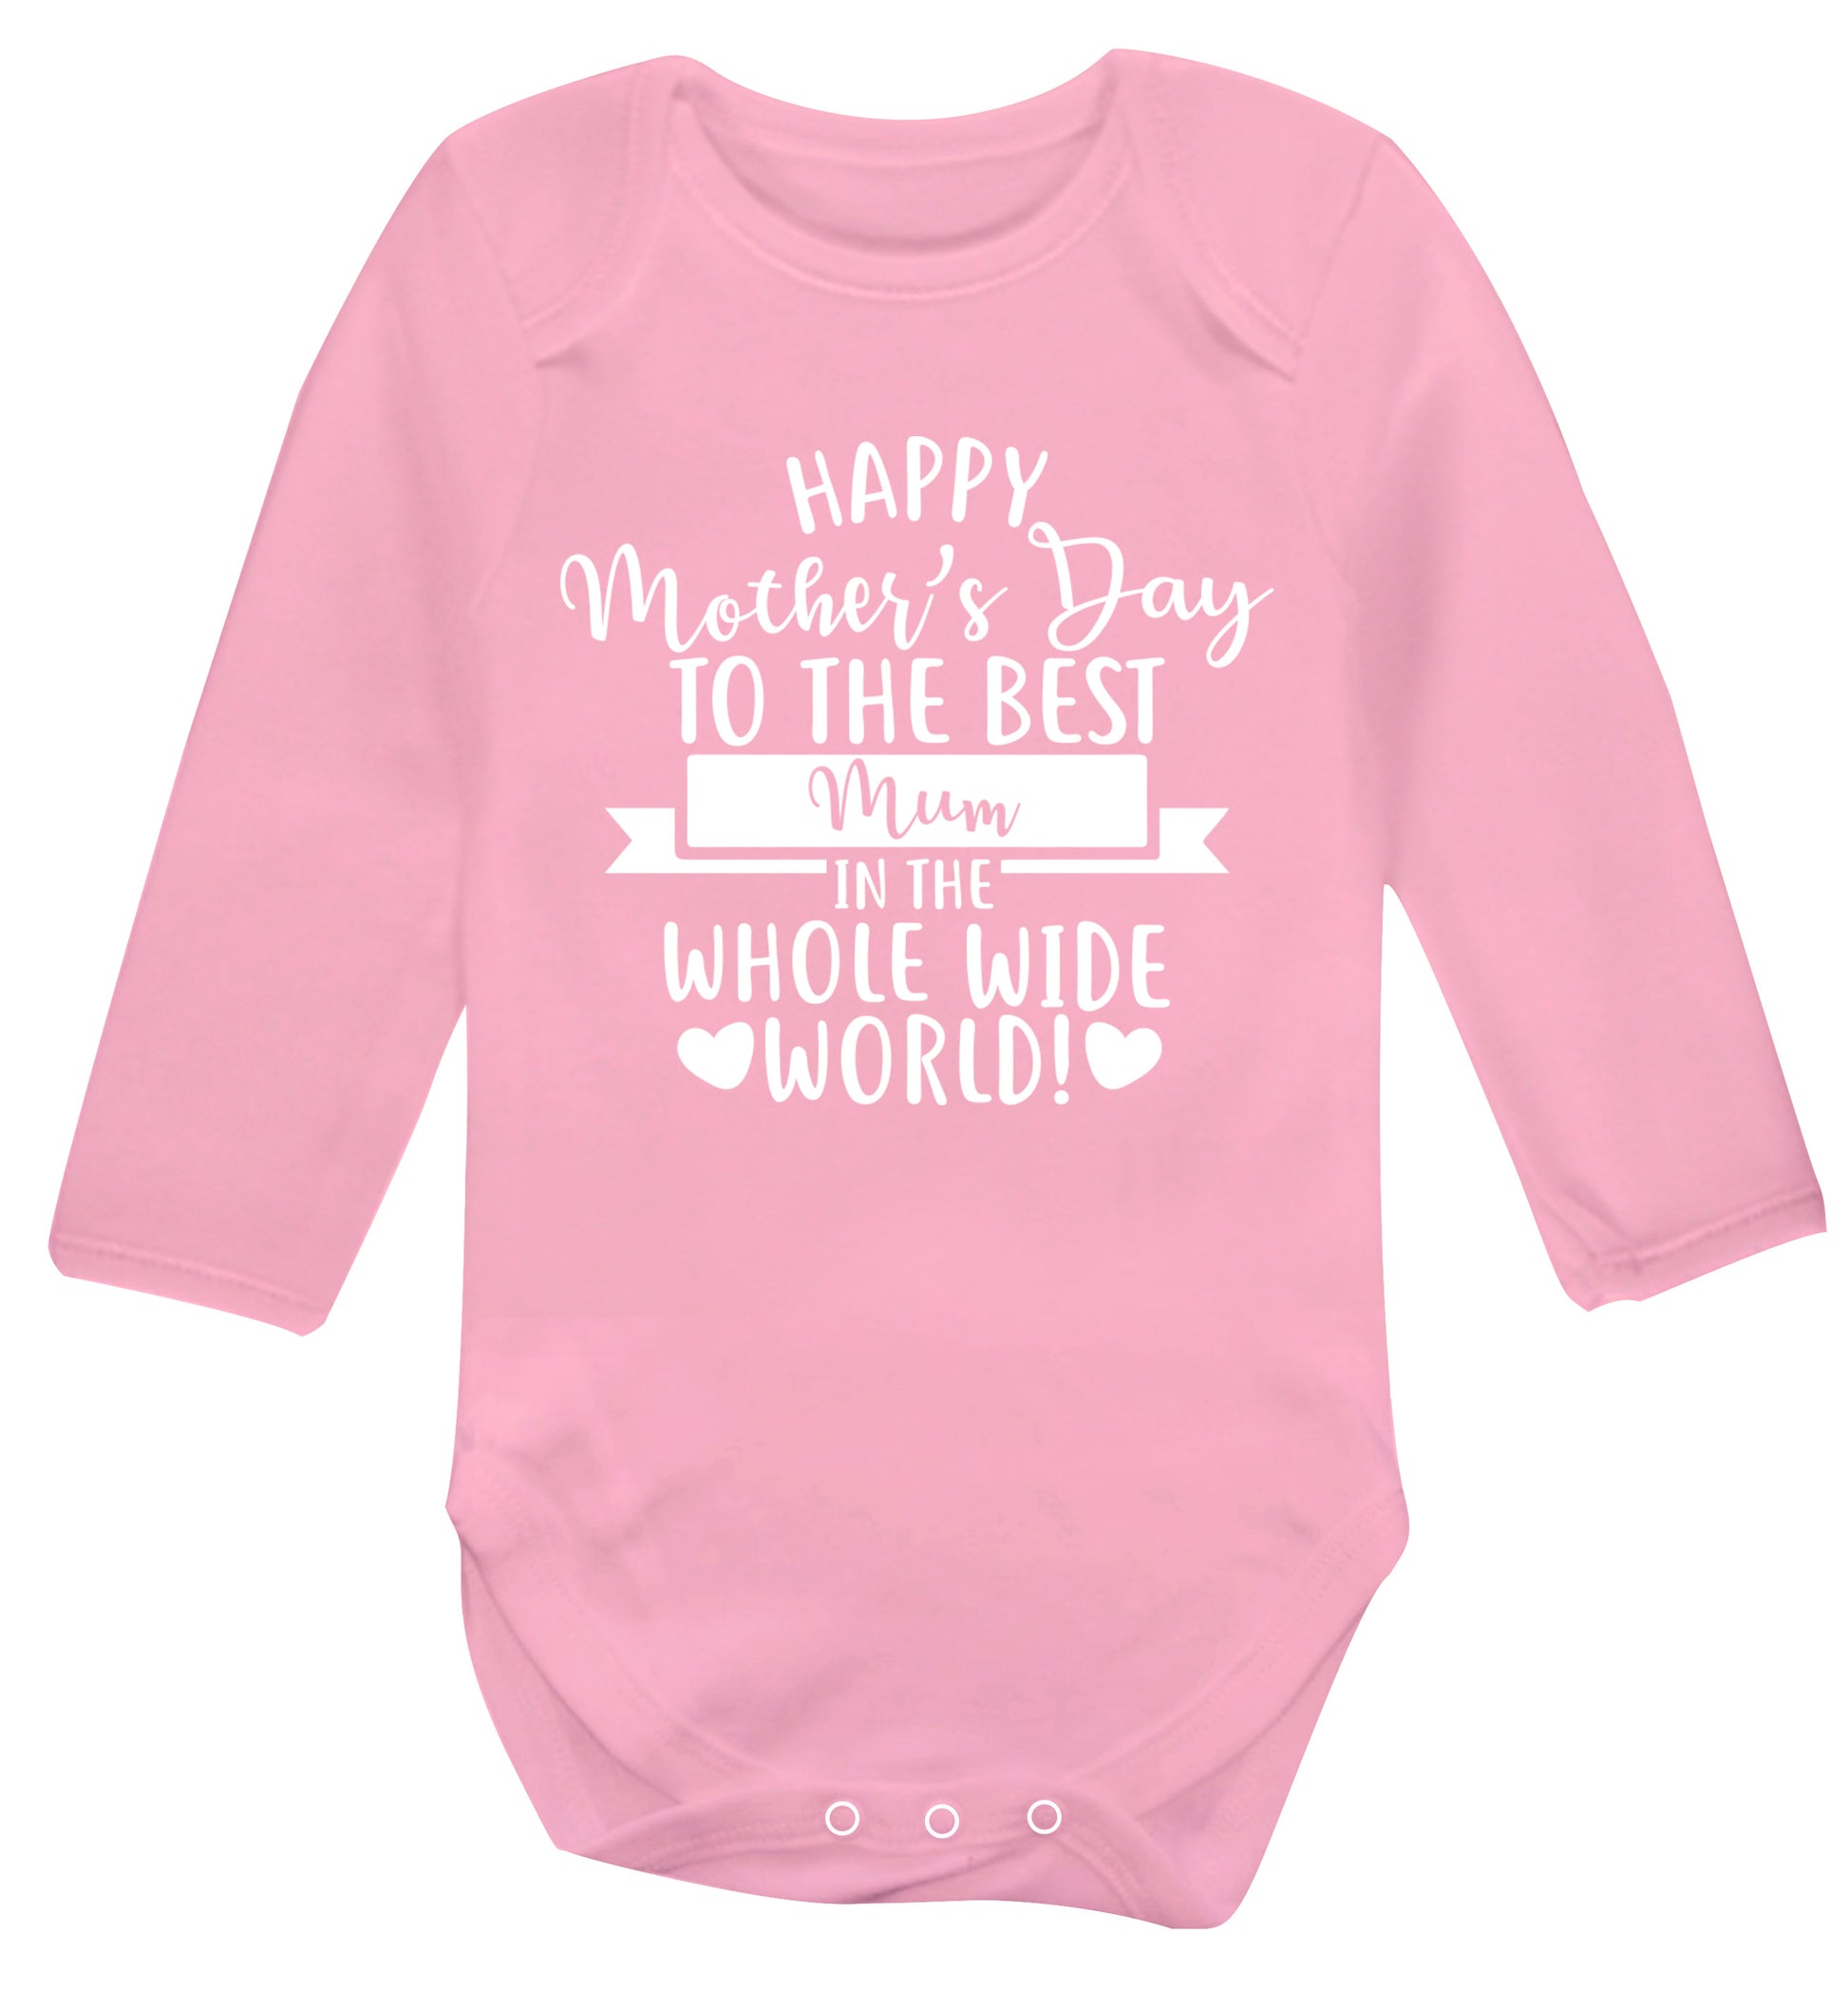 Happy Mother's Day to the best mum in the whole wide world! Baby Vest long sleeved pale pink 6-12 months